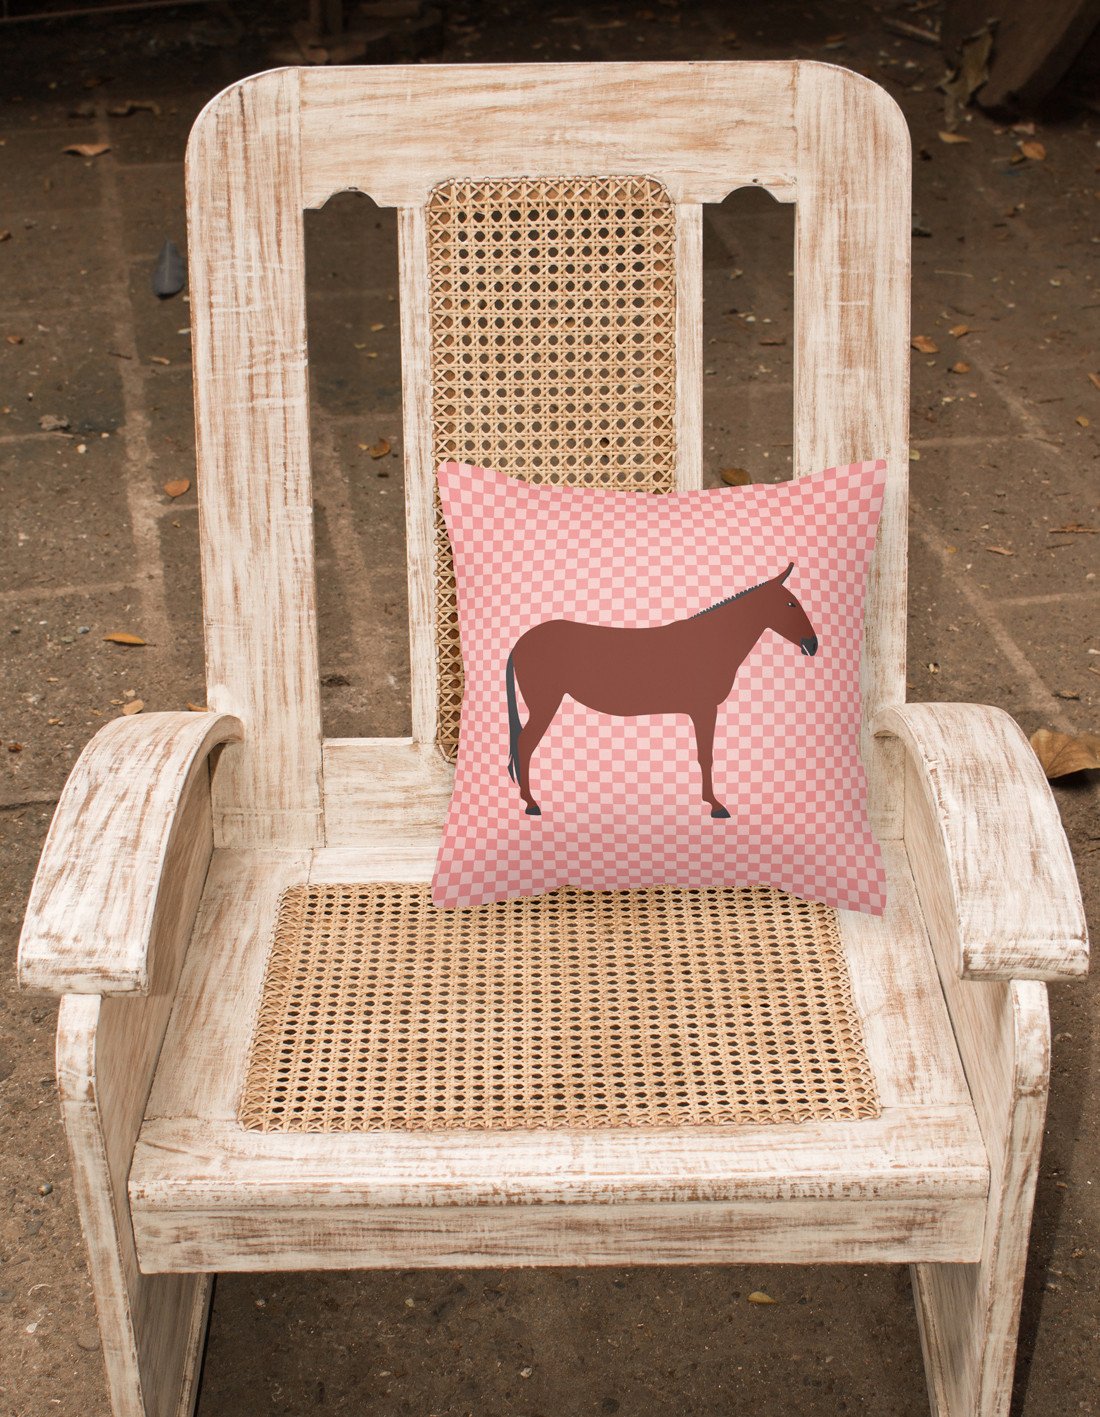 Hinny Horse Donkey Pink Check Fabric Decorative Pillow BB7850PW1818 by Caroline's Treasures